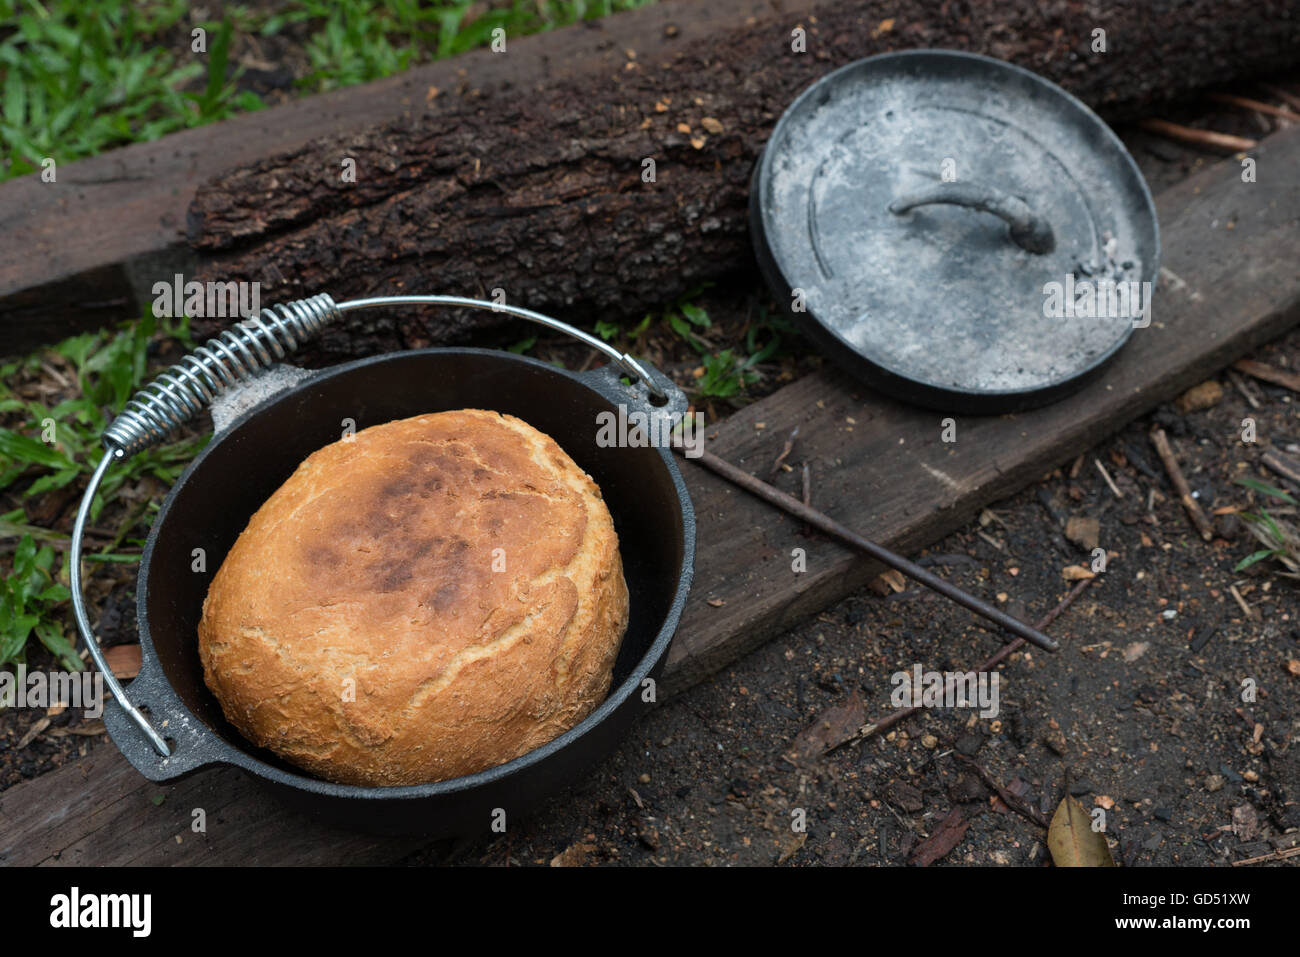 Dutch Oven in Camp Fire stock photo. Image of tripod - 49018300